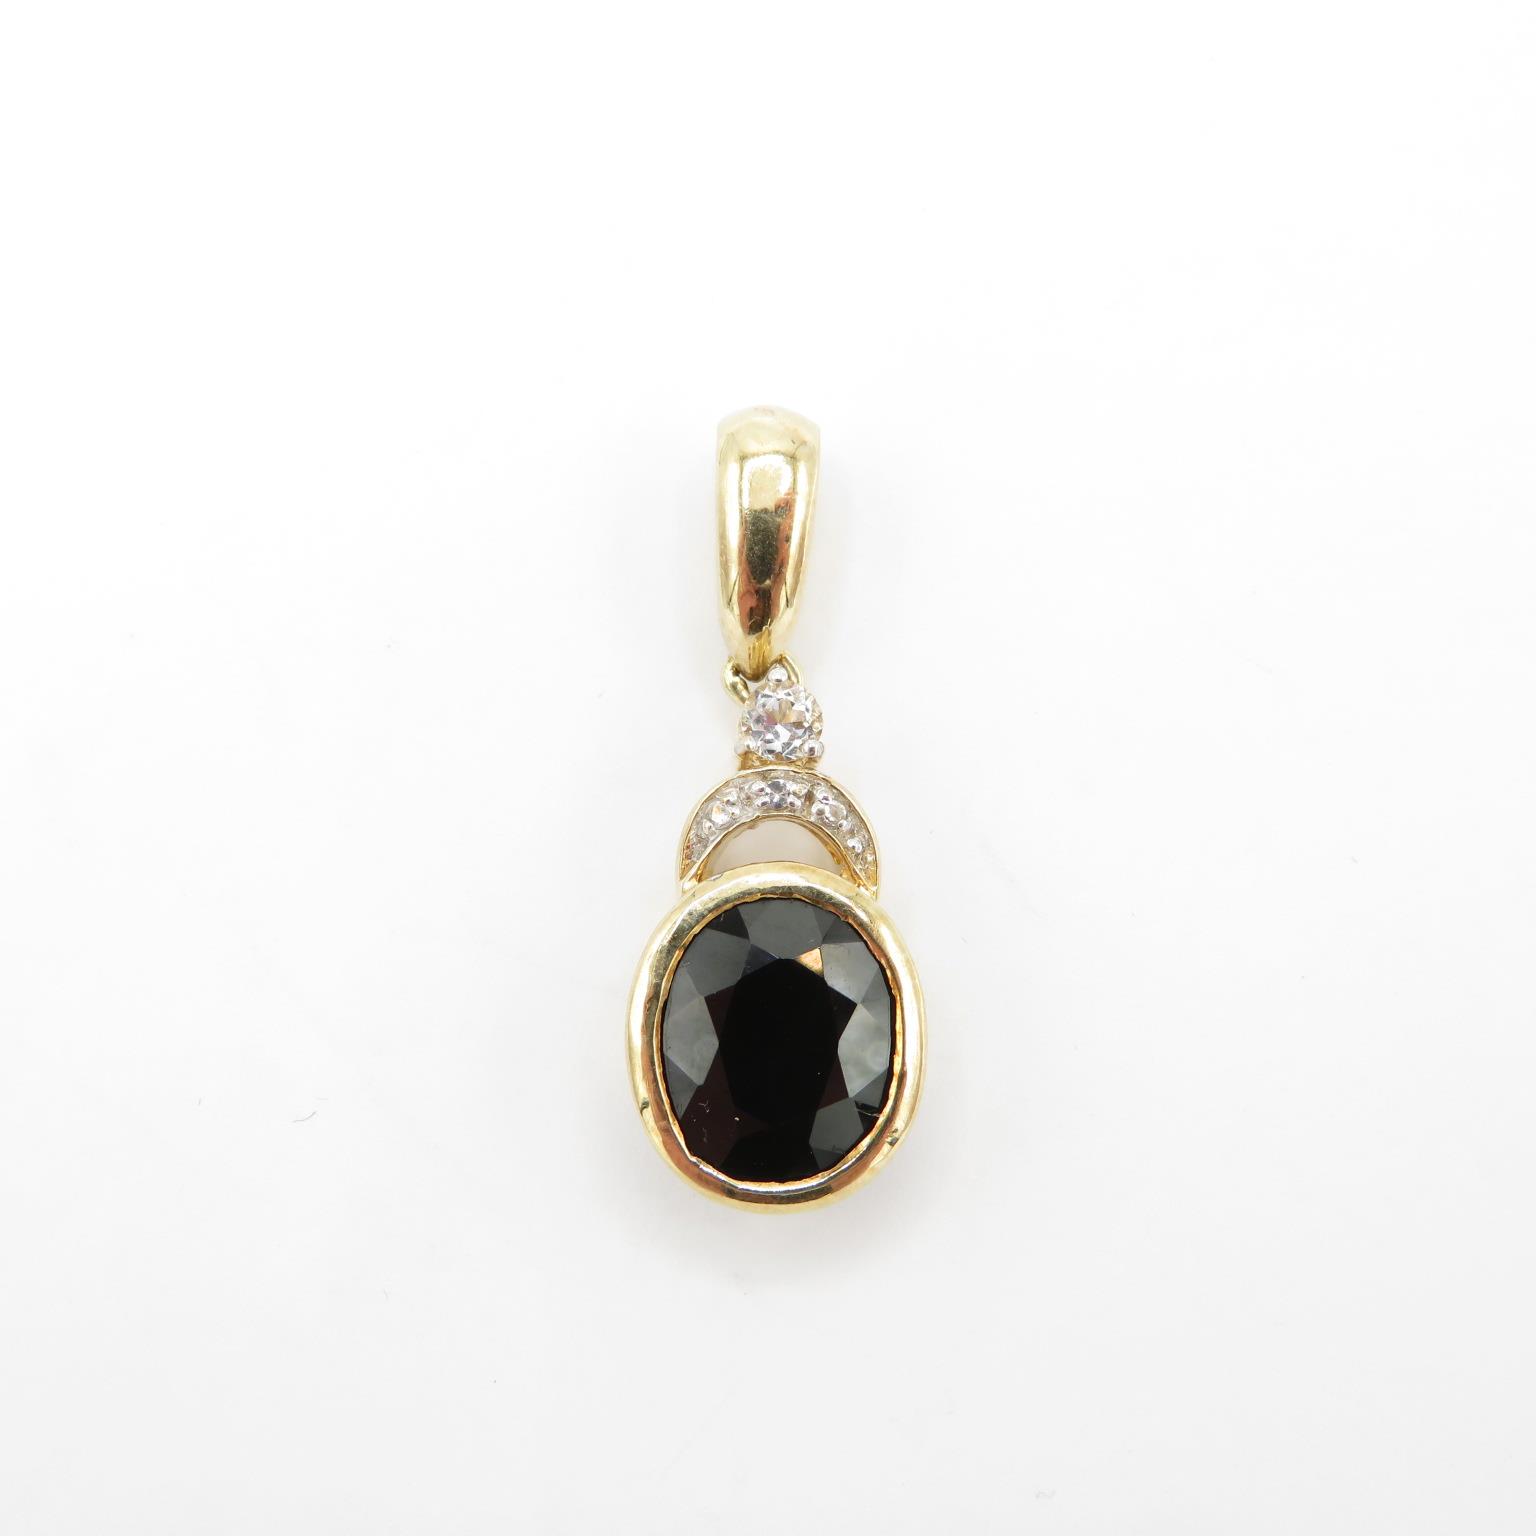 HM 9ct gold pendant with garnet centre stone and white CZ stone accents (4.1g) - Image 2 of 5